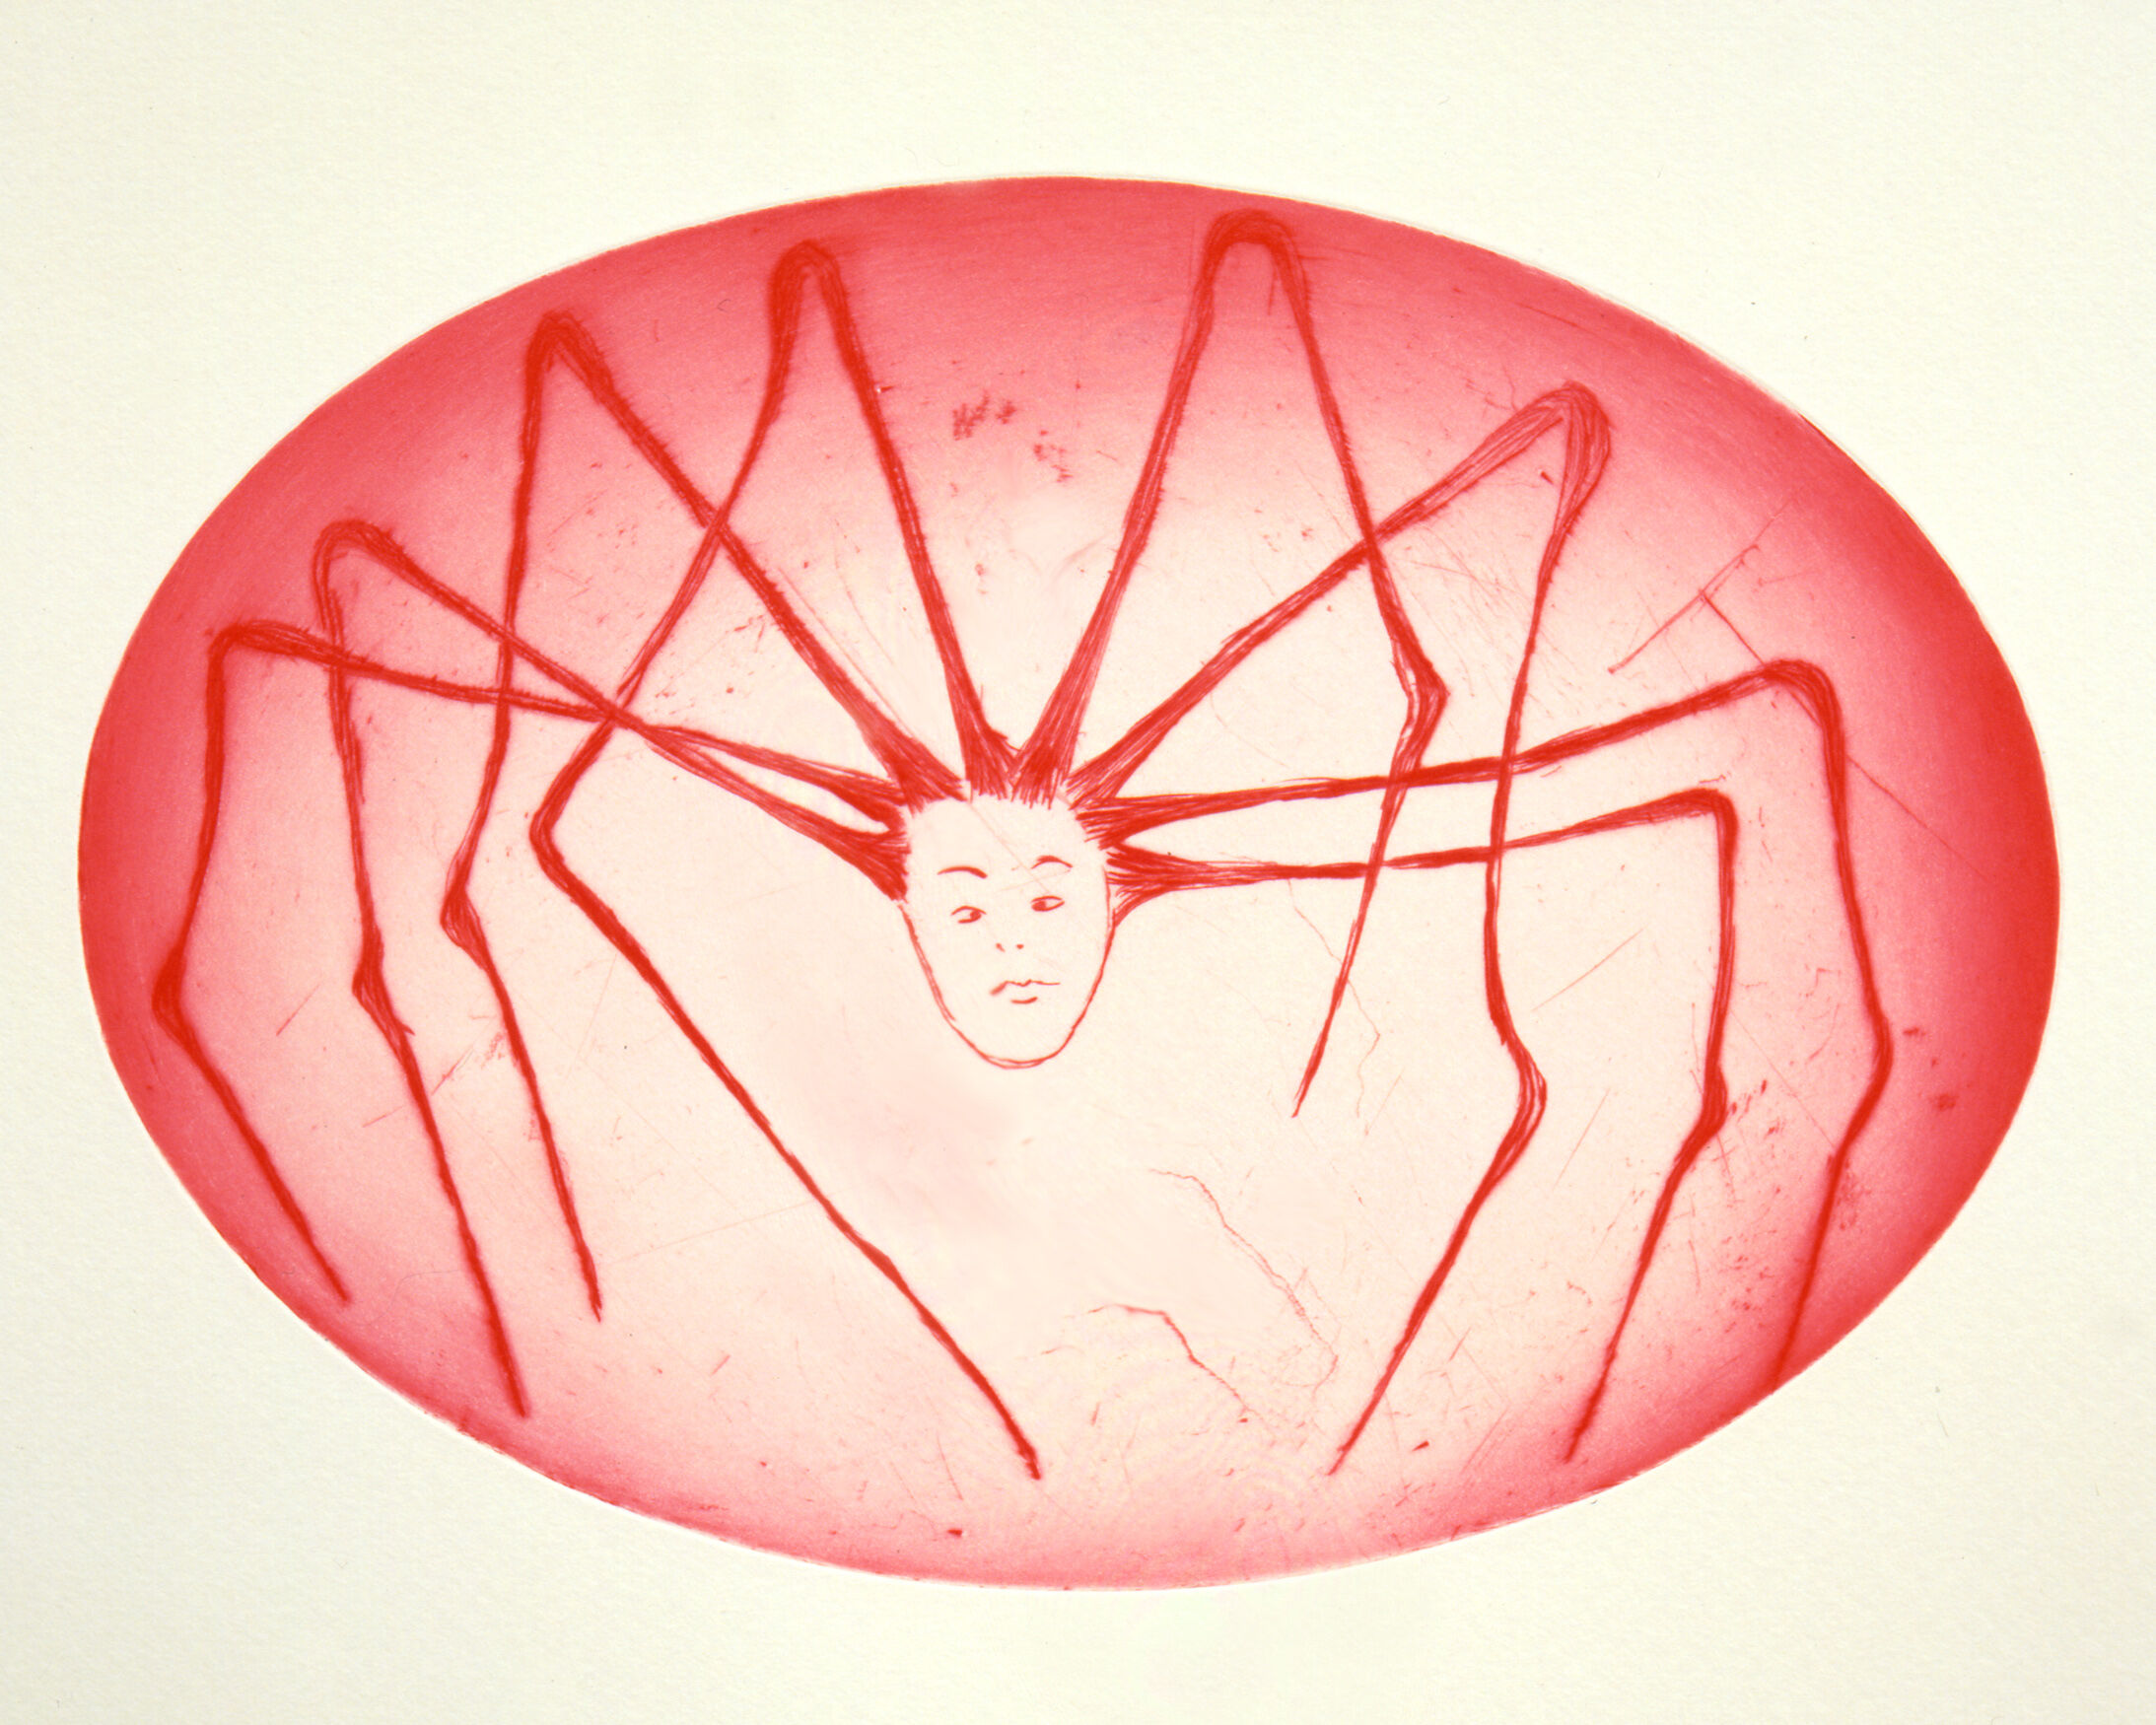 louise bourgeois spider woman